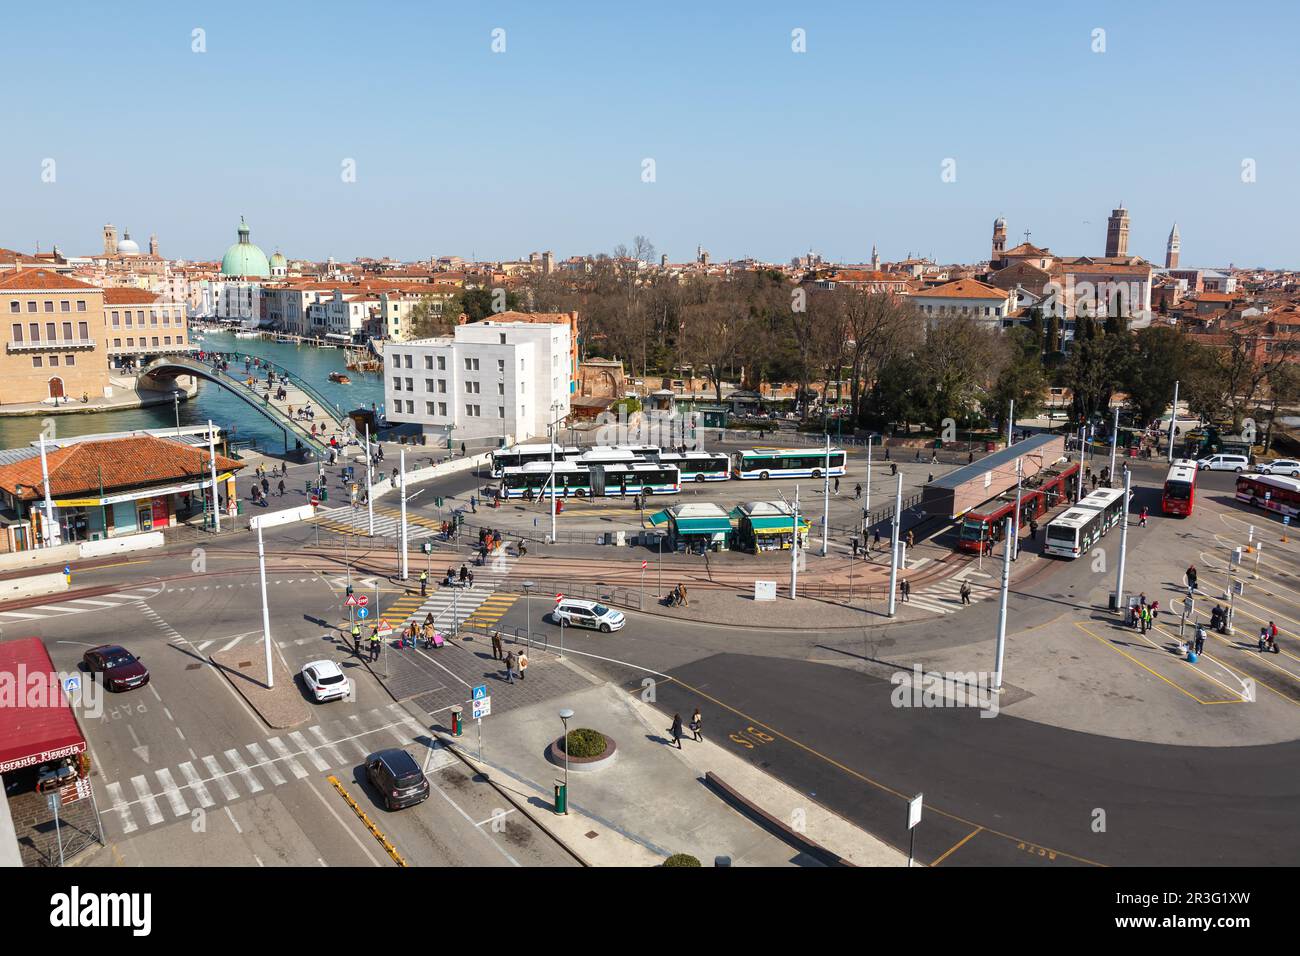 Bus station with streetcar on rubber wheels Tram Venezia at Piazzale Roma in Venice, Italy Stock Photo